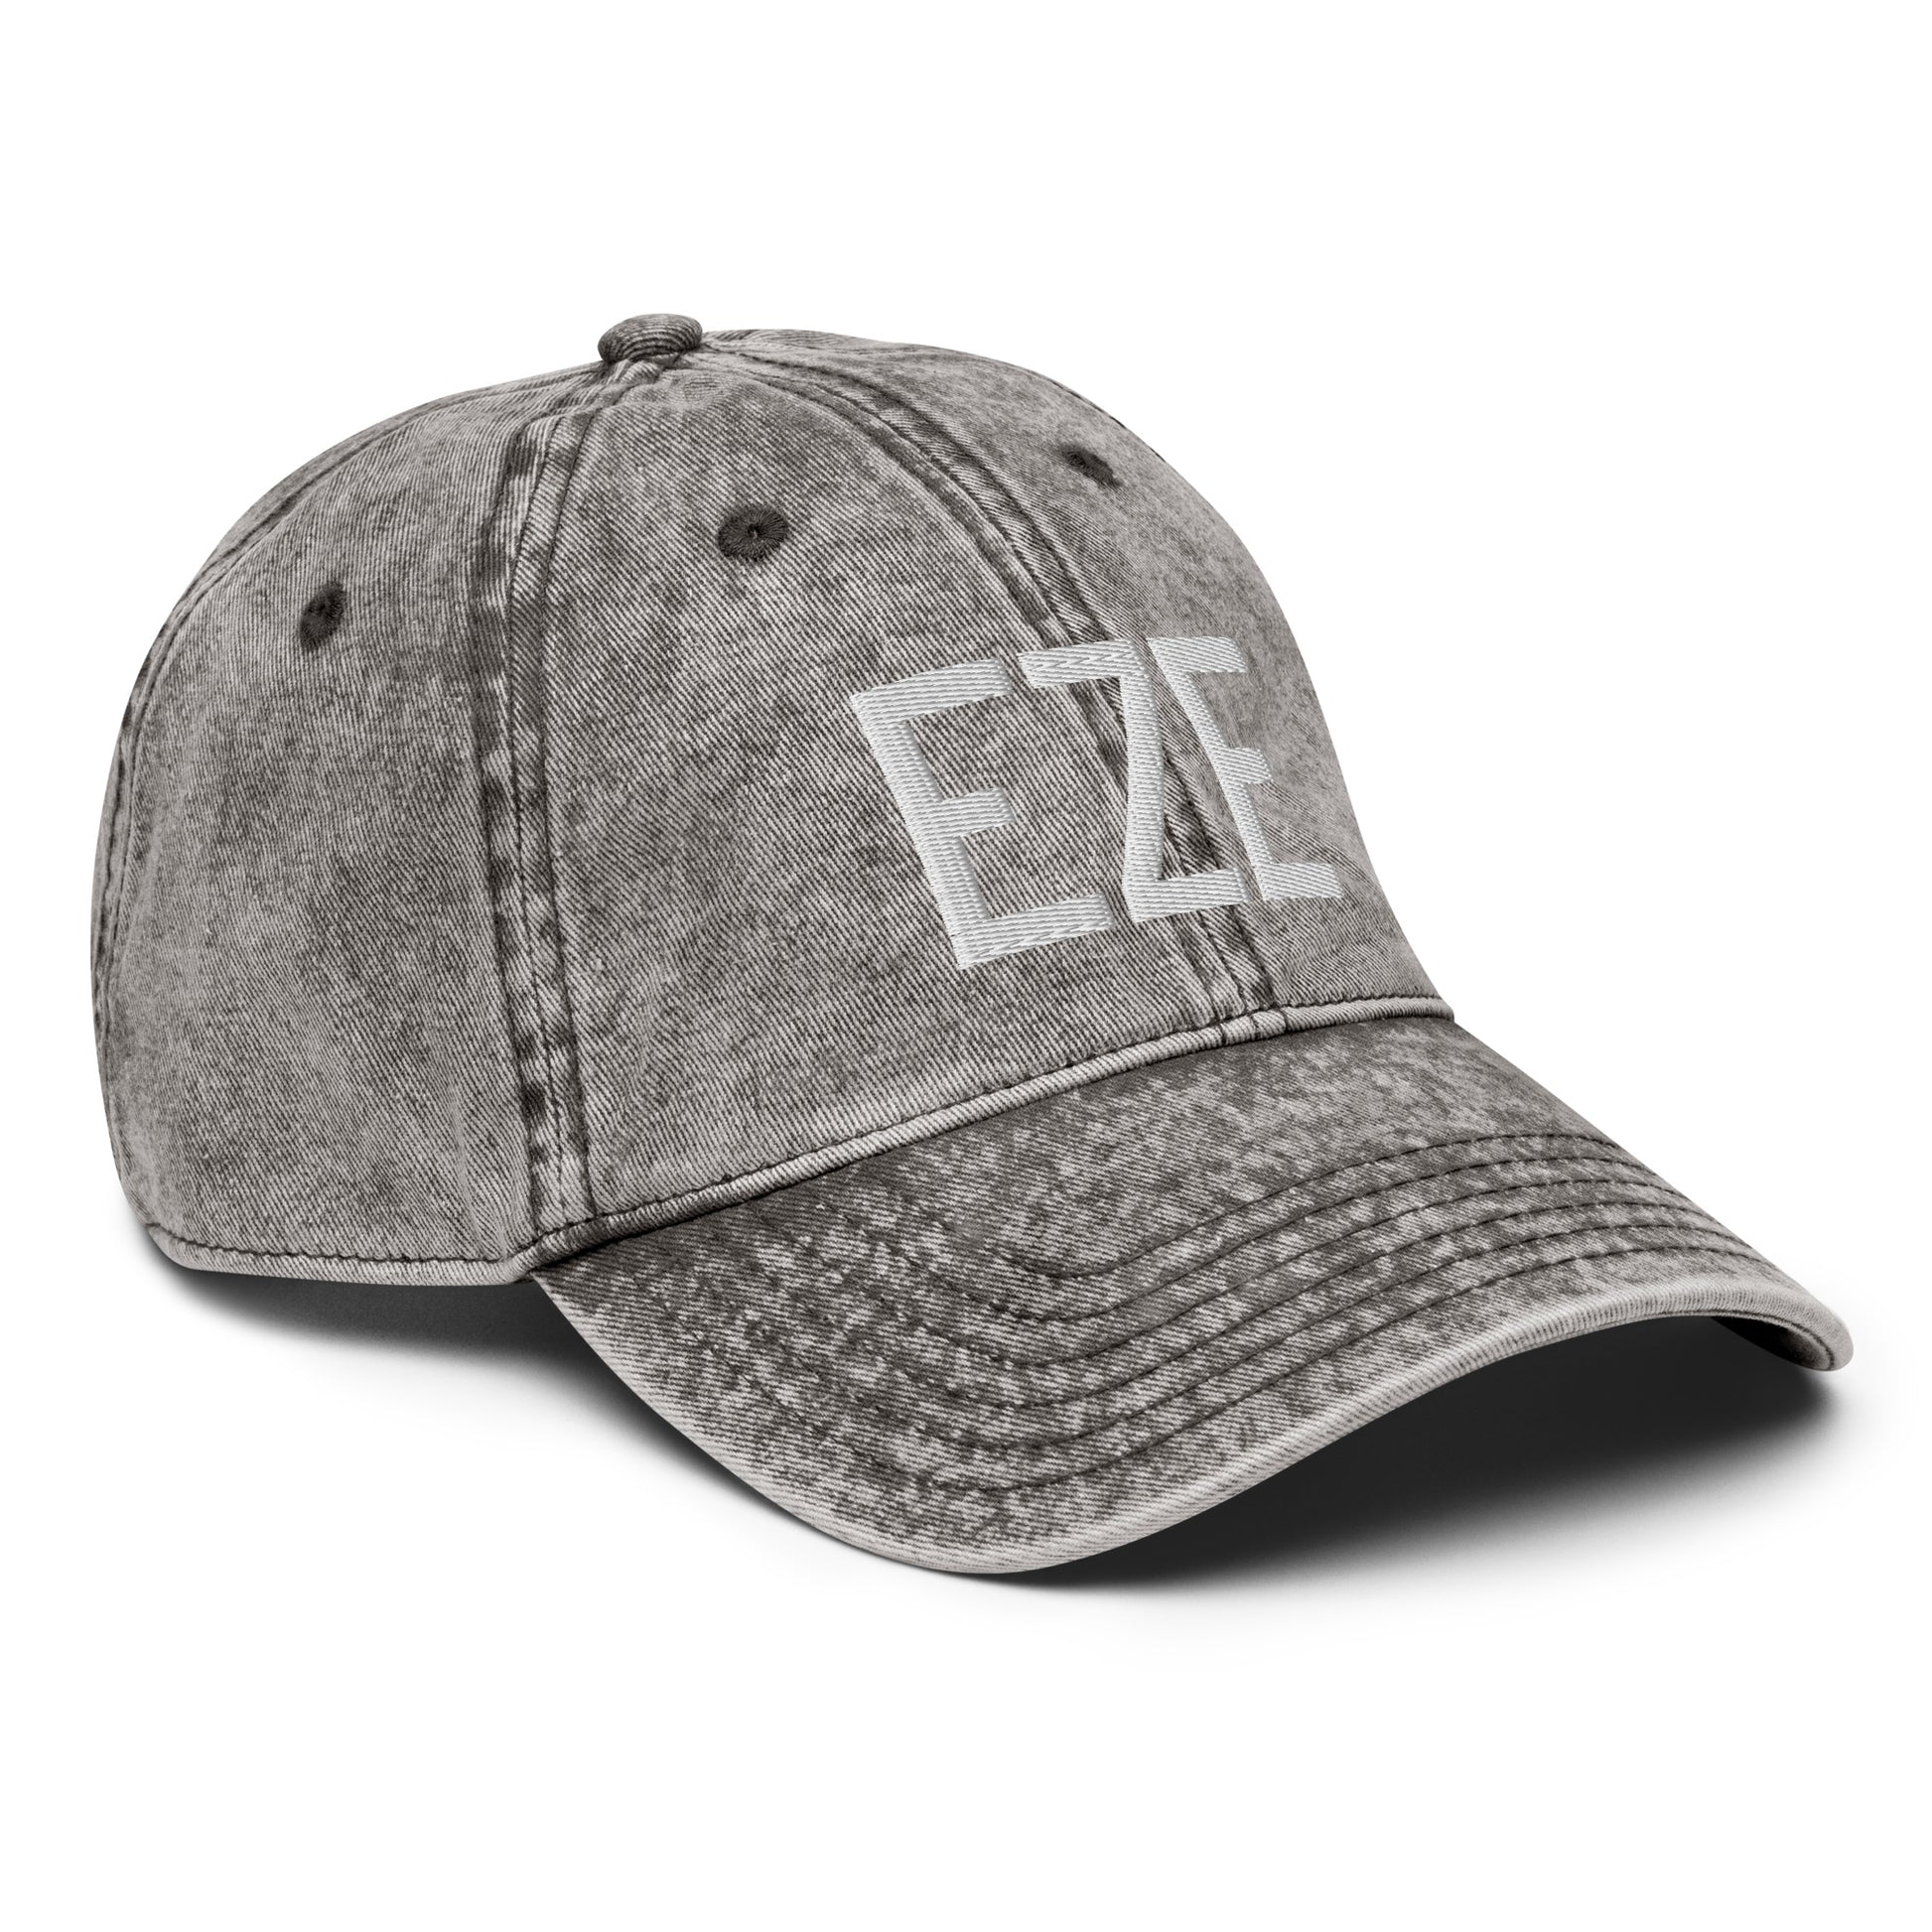 Airport Code Twill Cap - White • EZE Buenos Aires • YHM Designs - Image 30